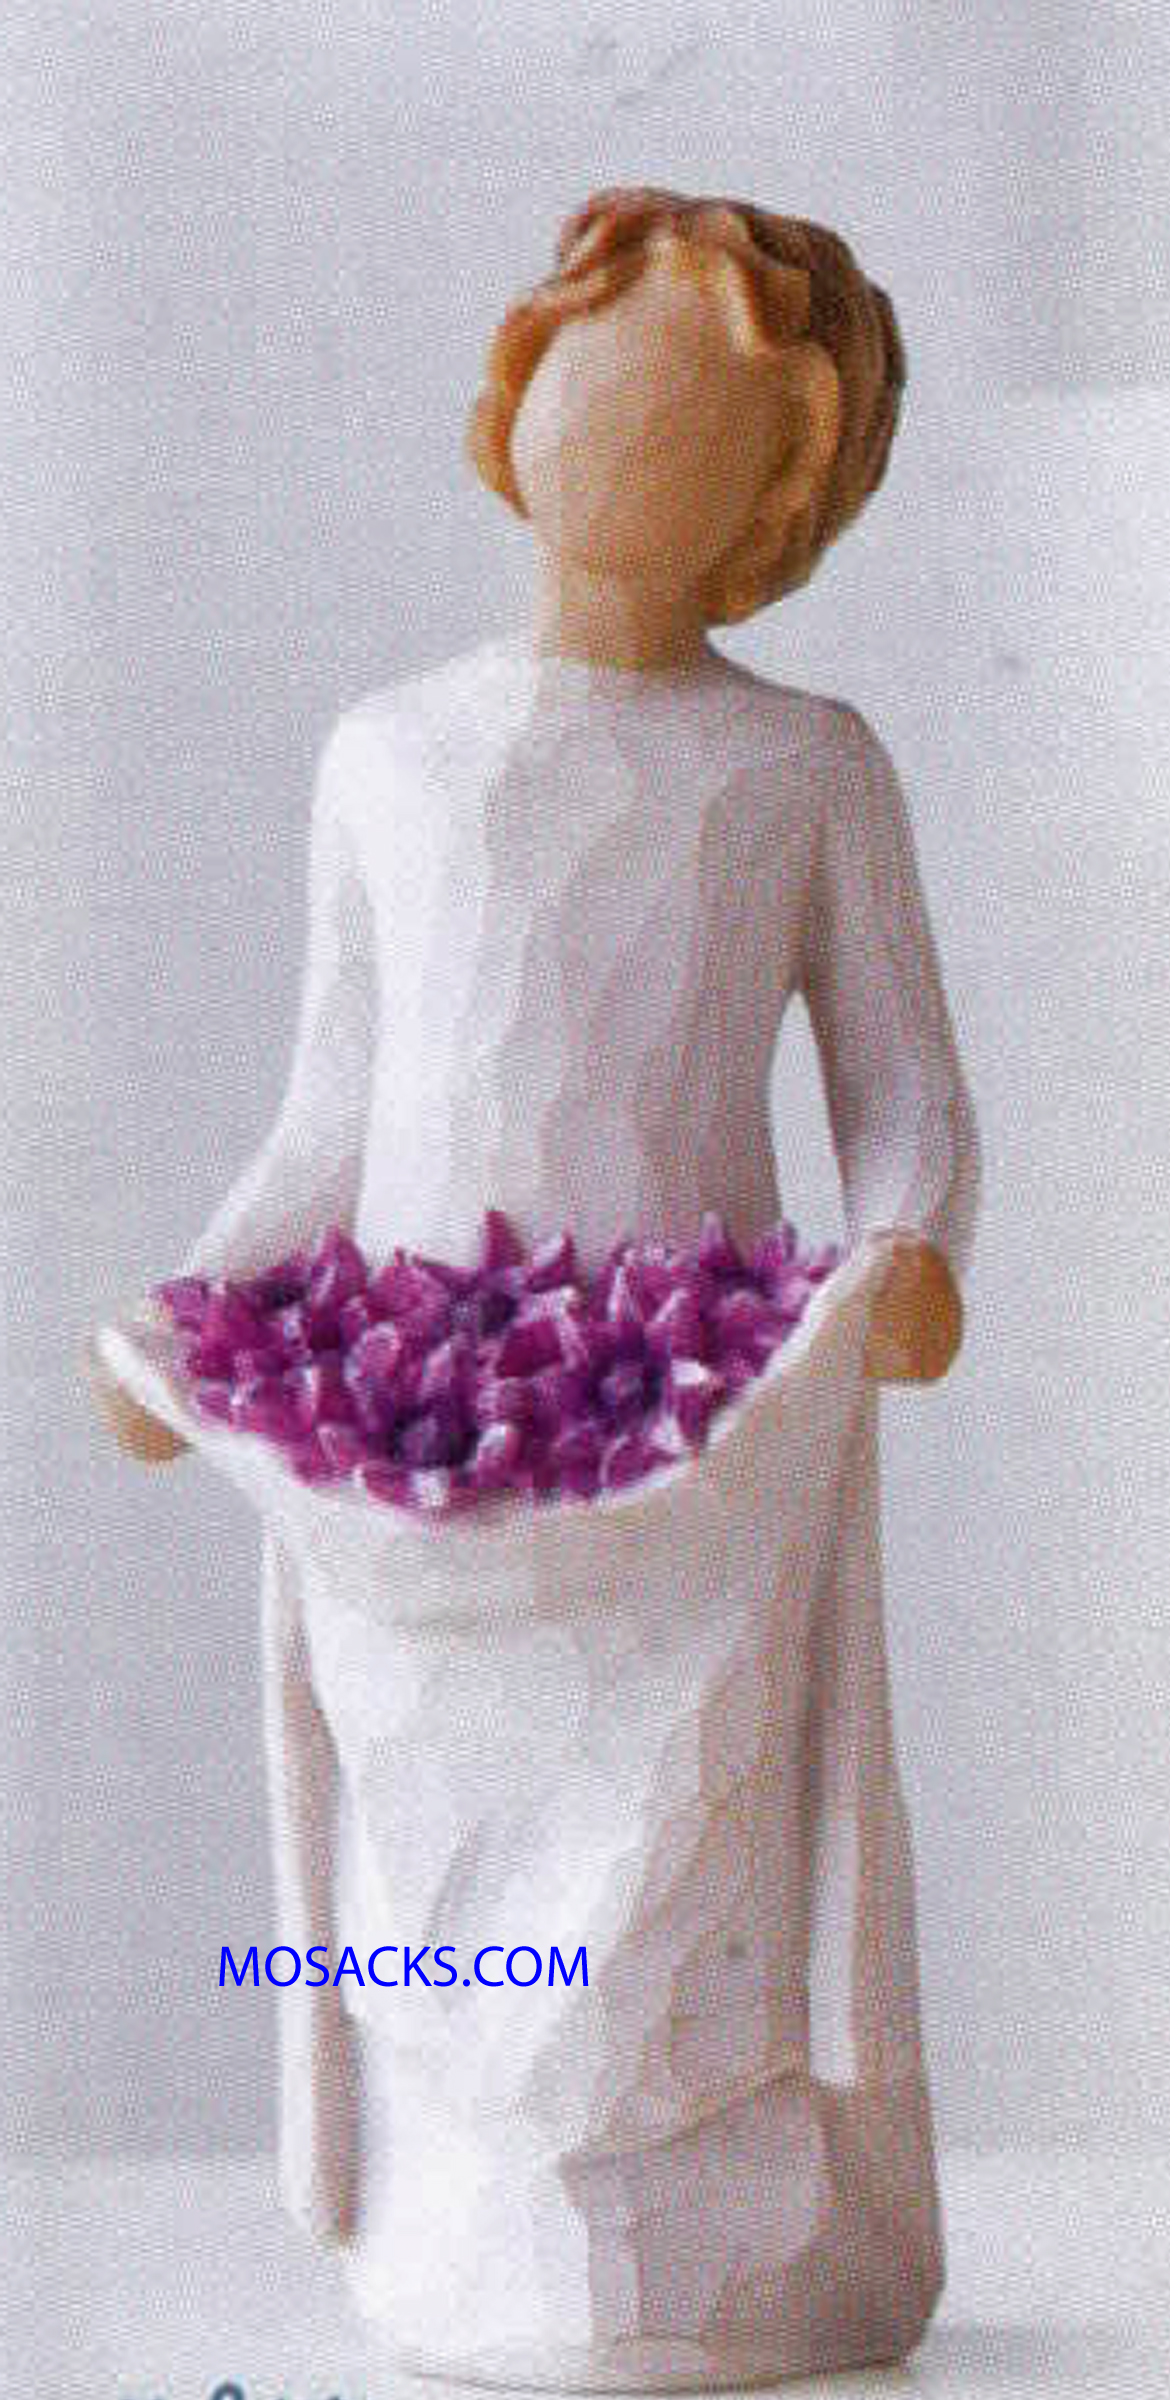 Willow Tree Figurine, Simple Joys: You're simply a joy in my life 5.5" High 27242. This is a figurine of a girl lifting her gown filled with purple flowers 27242 FREE SHIPPING WITH $100. ORDERS